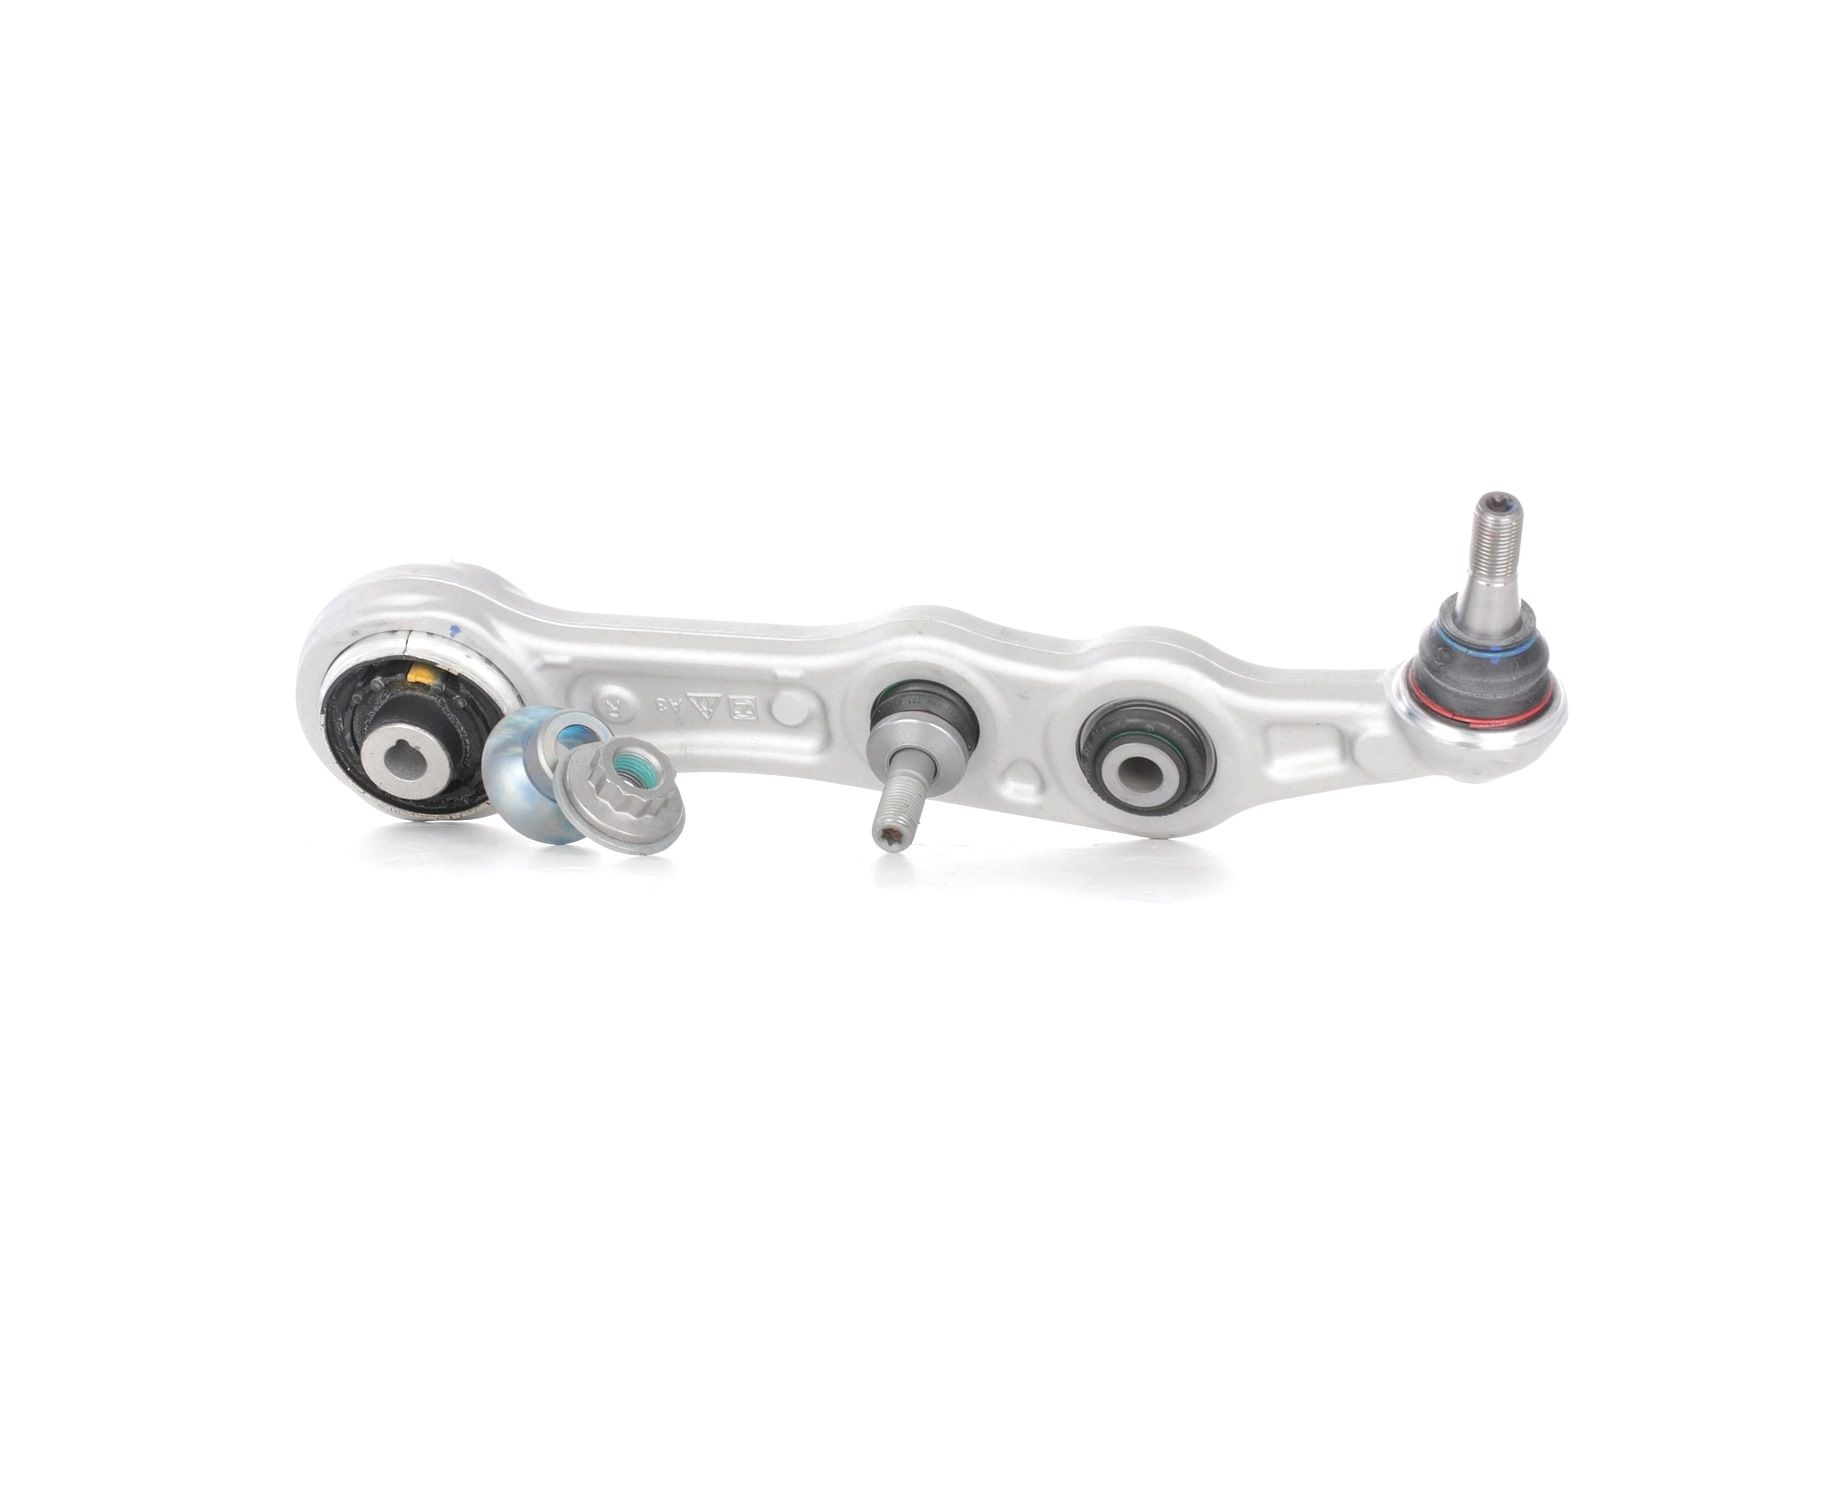 LEMFÖRDER Control arms rear and front Mercedes S205 new 39585 01